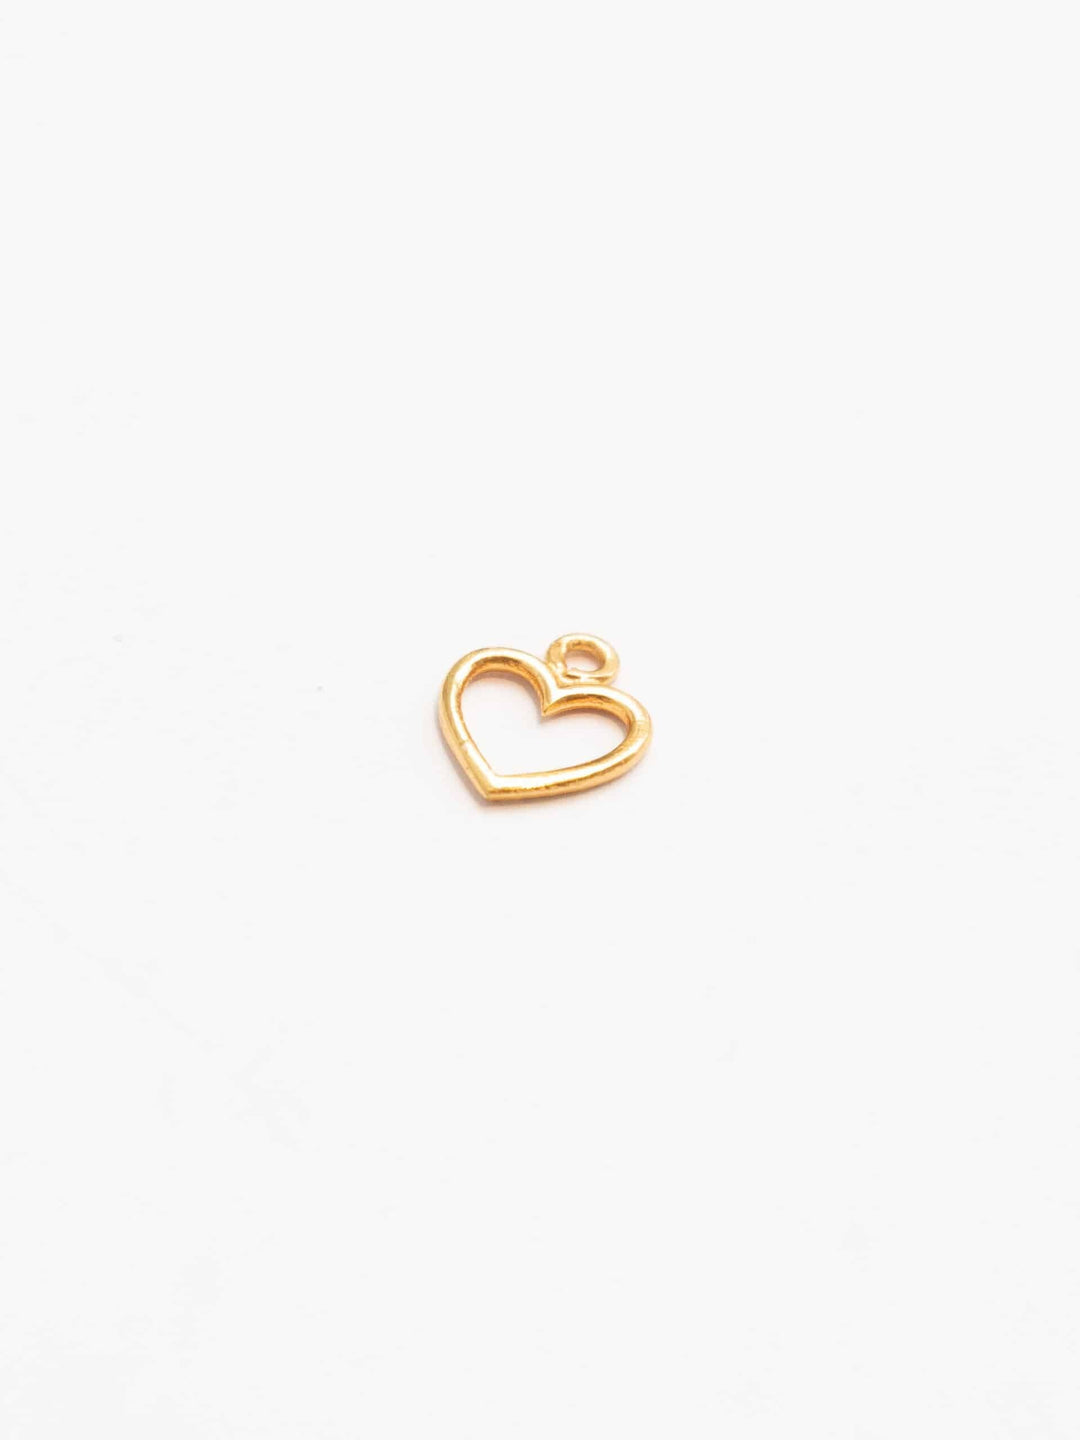 Personalized Simple Heart Pendant - Herz Anhänger